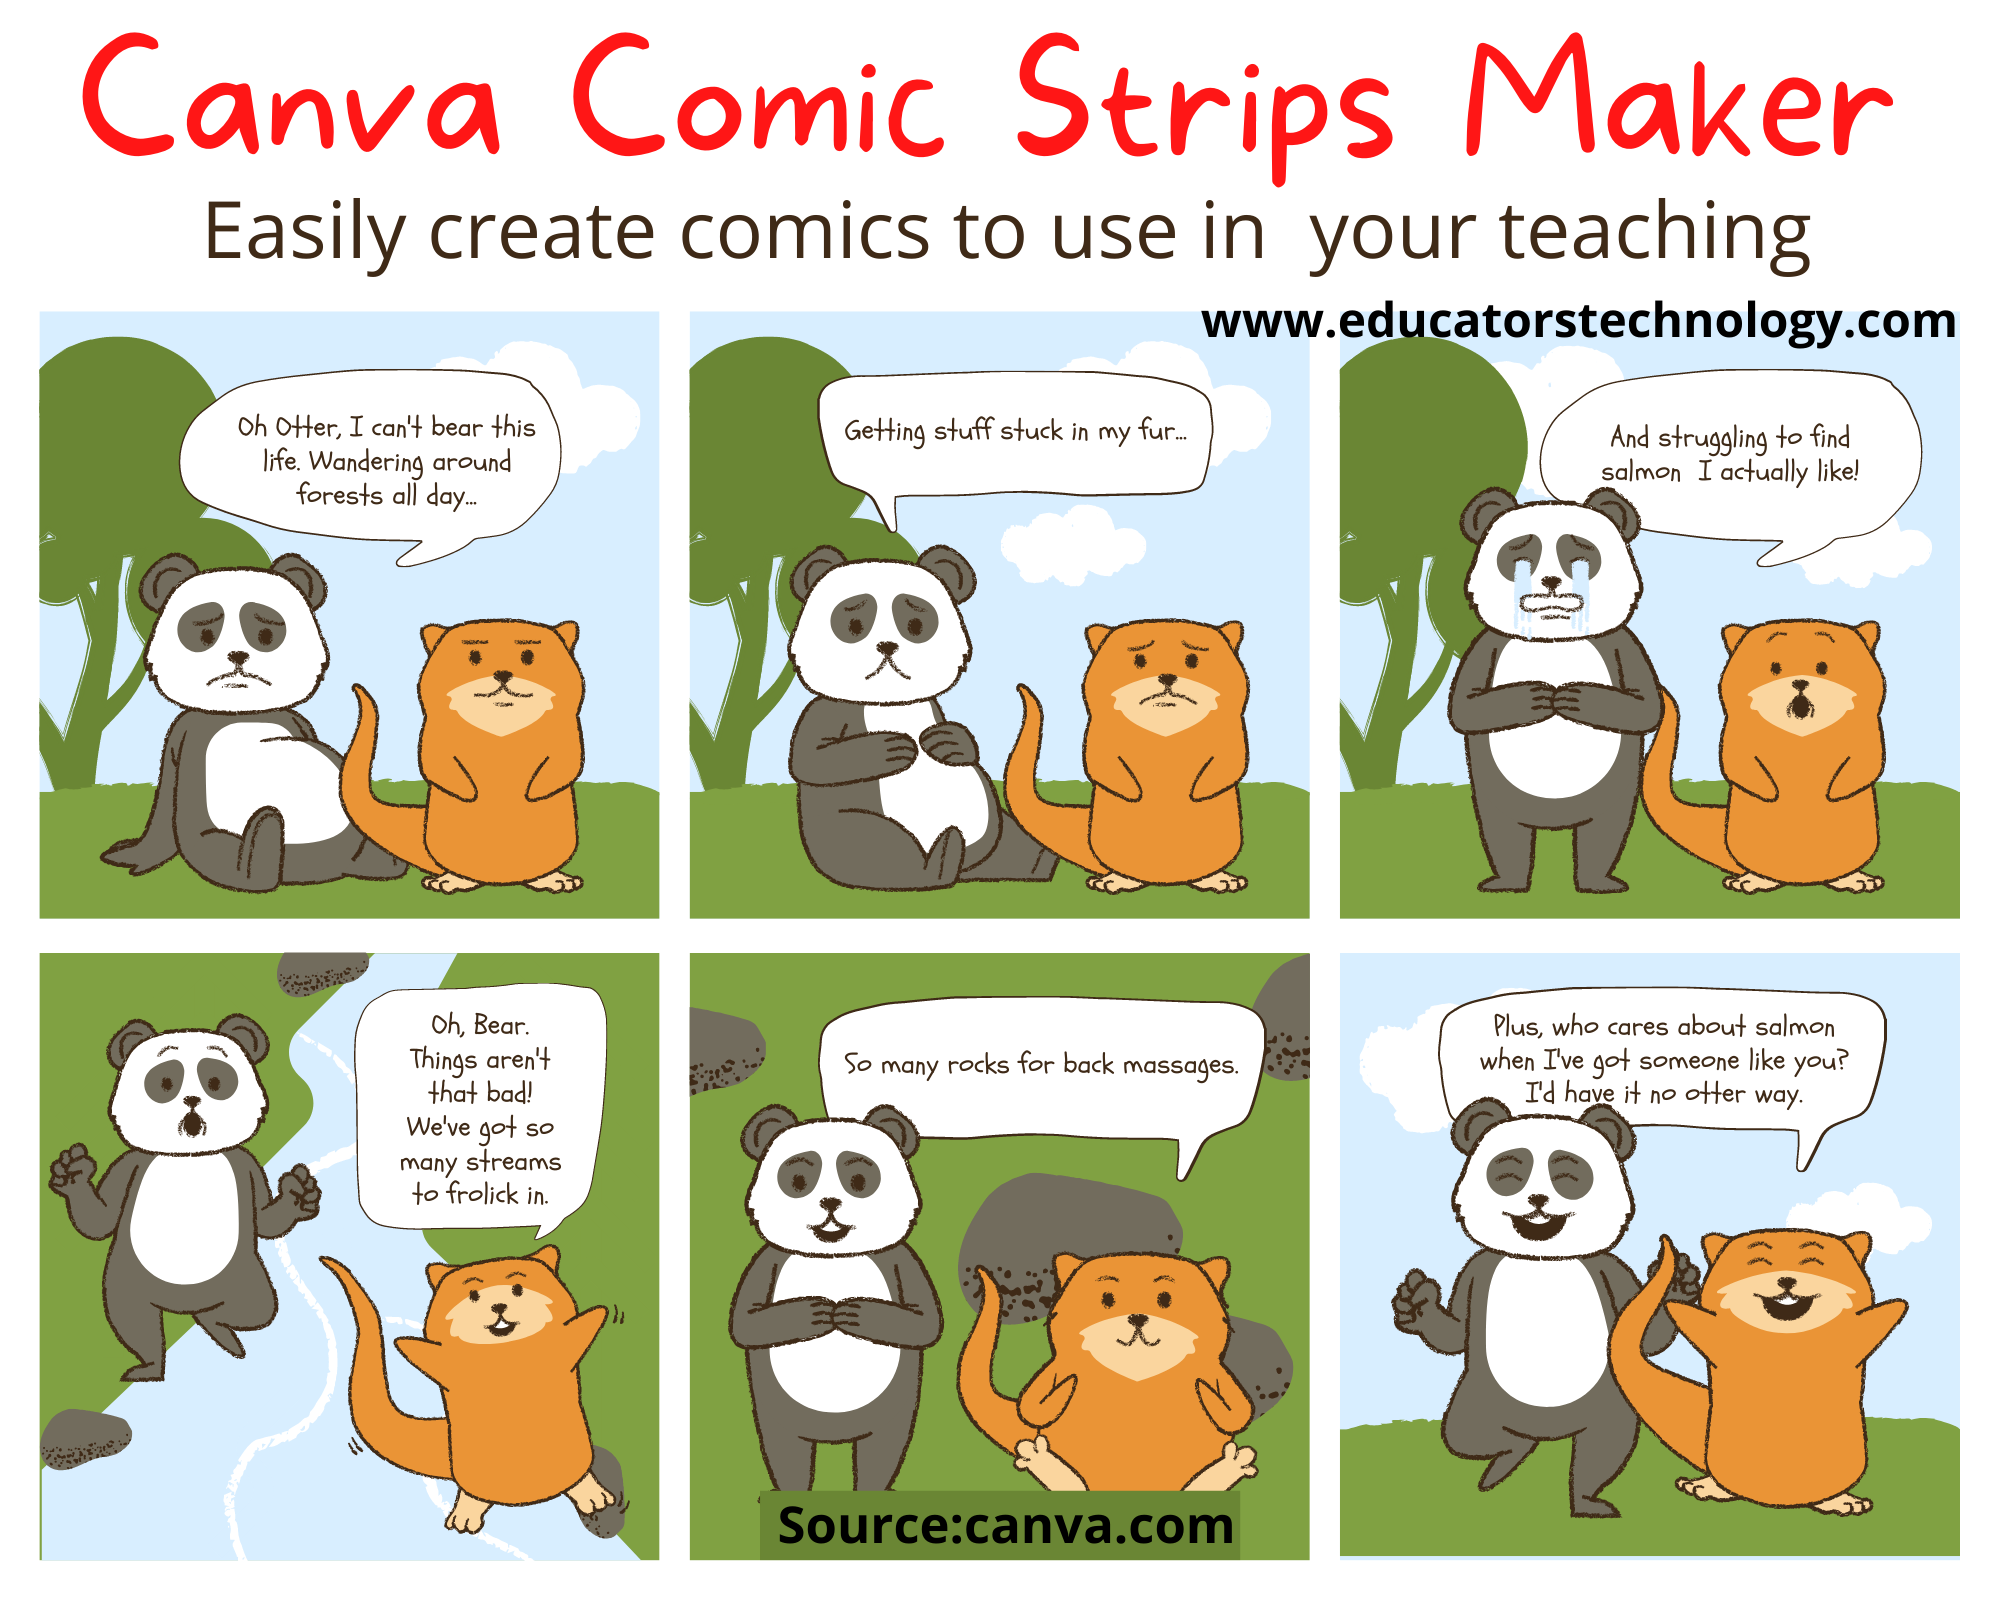 How to Create a Comic Strip Using Canva Easy Guide Educators Technology